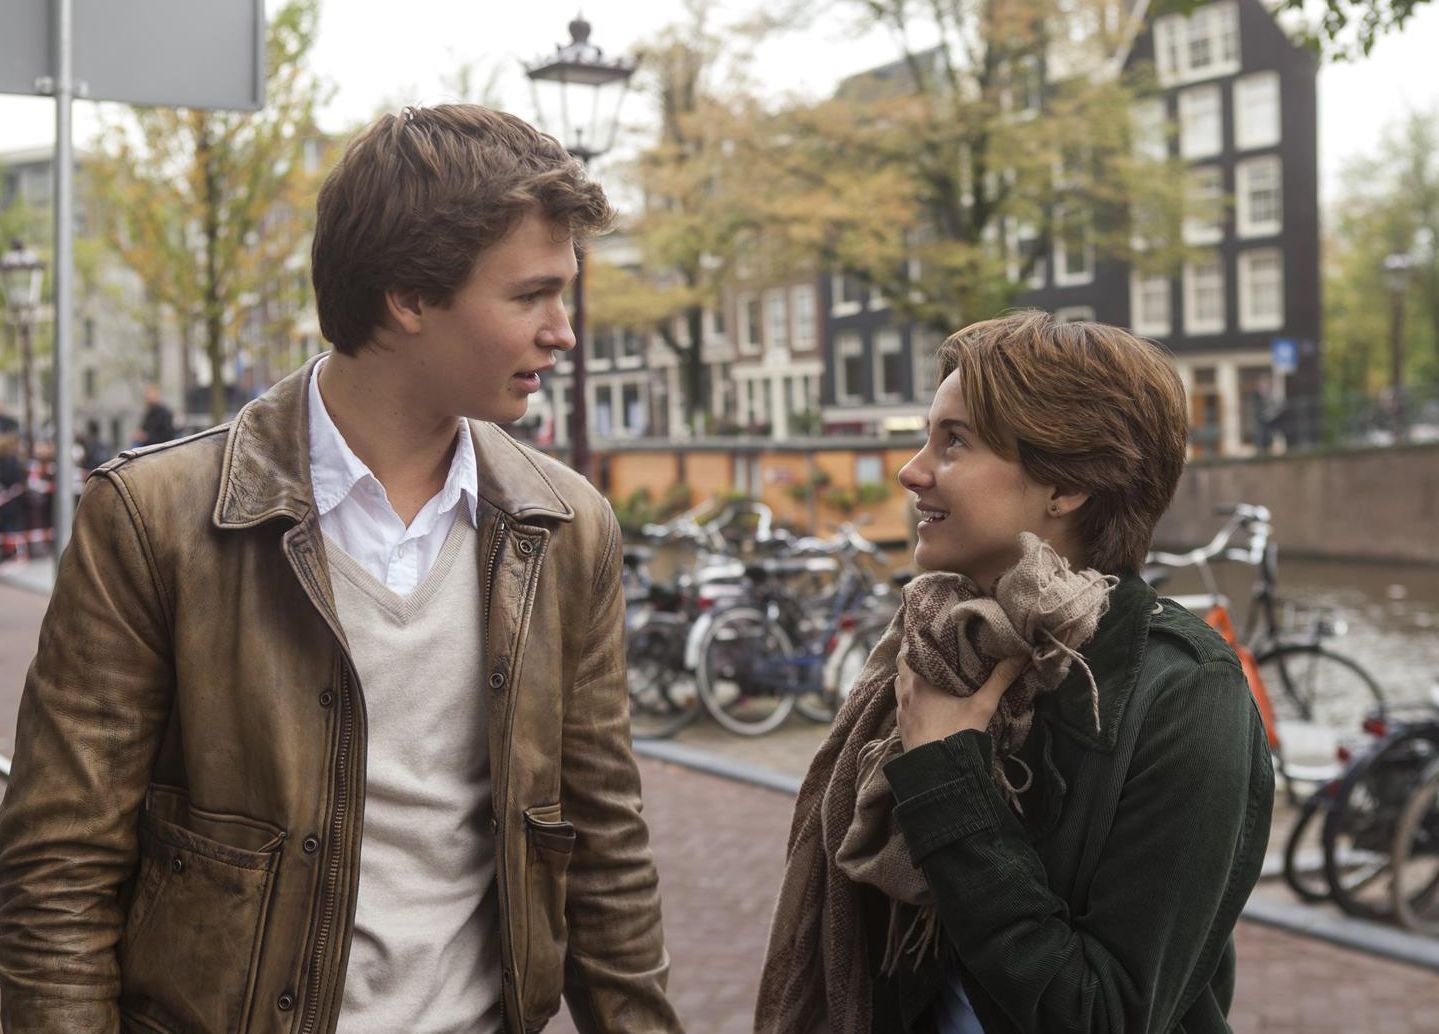 Shailene Woodley and Ansel Elgort in Amsterdam, The Fault in